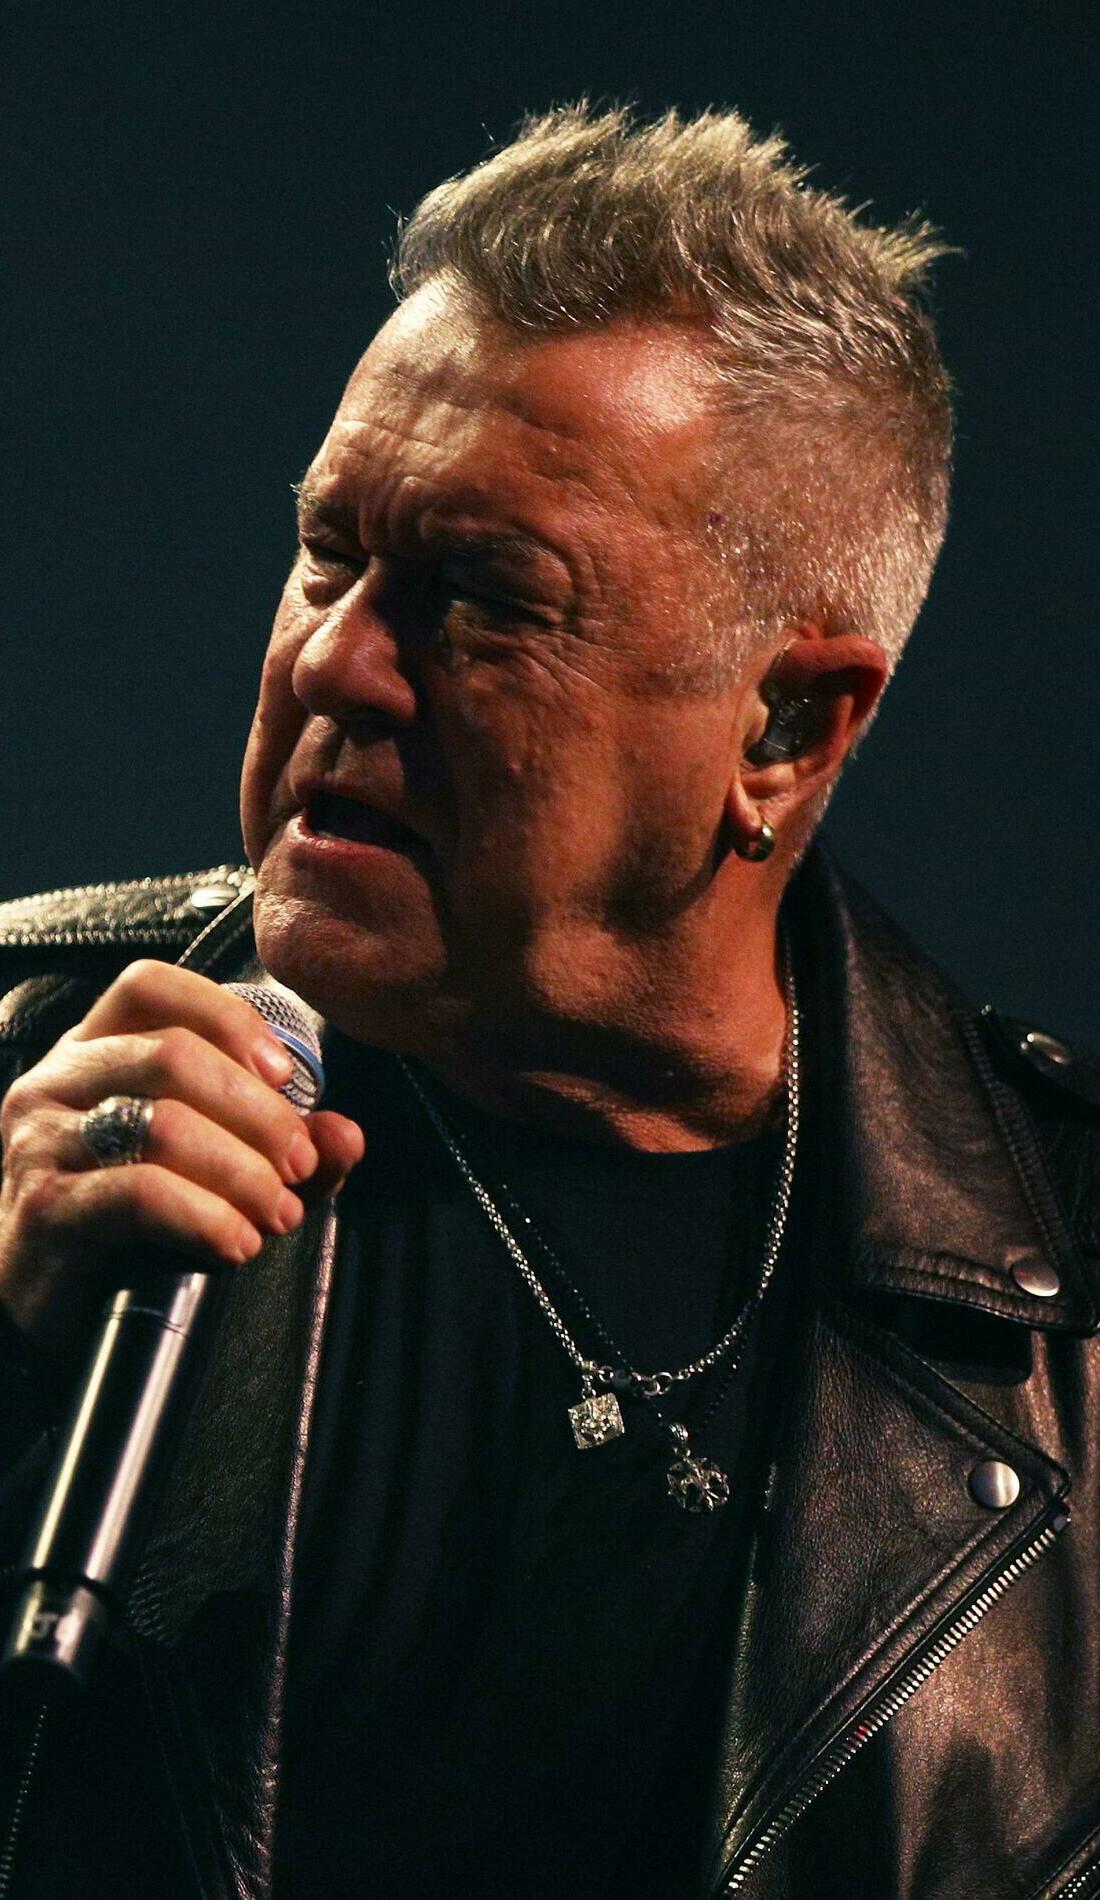 A Jimmy Barnes live event